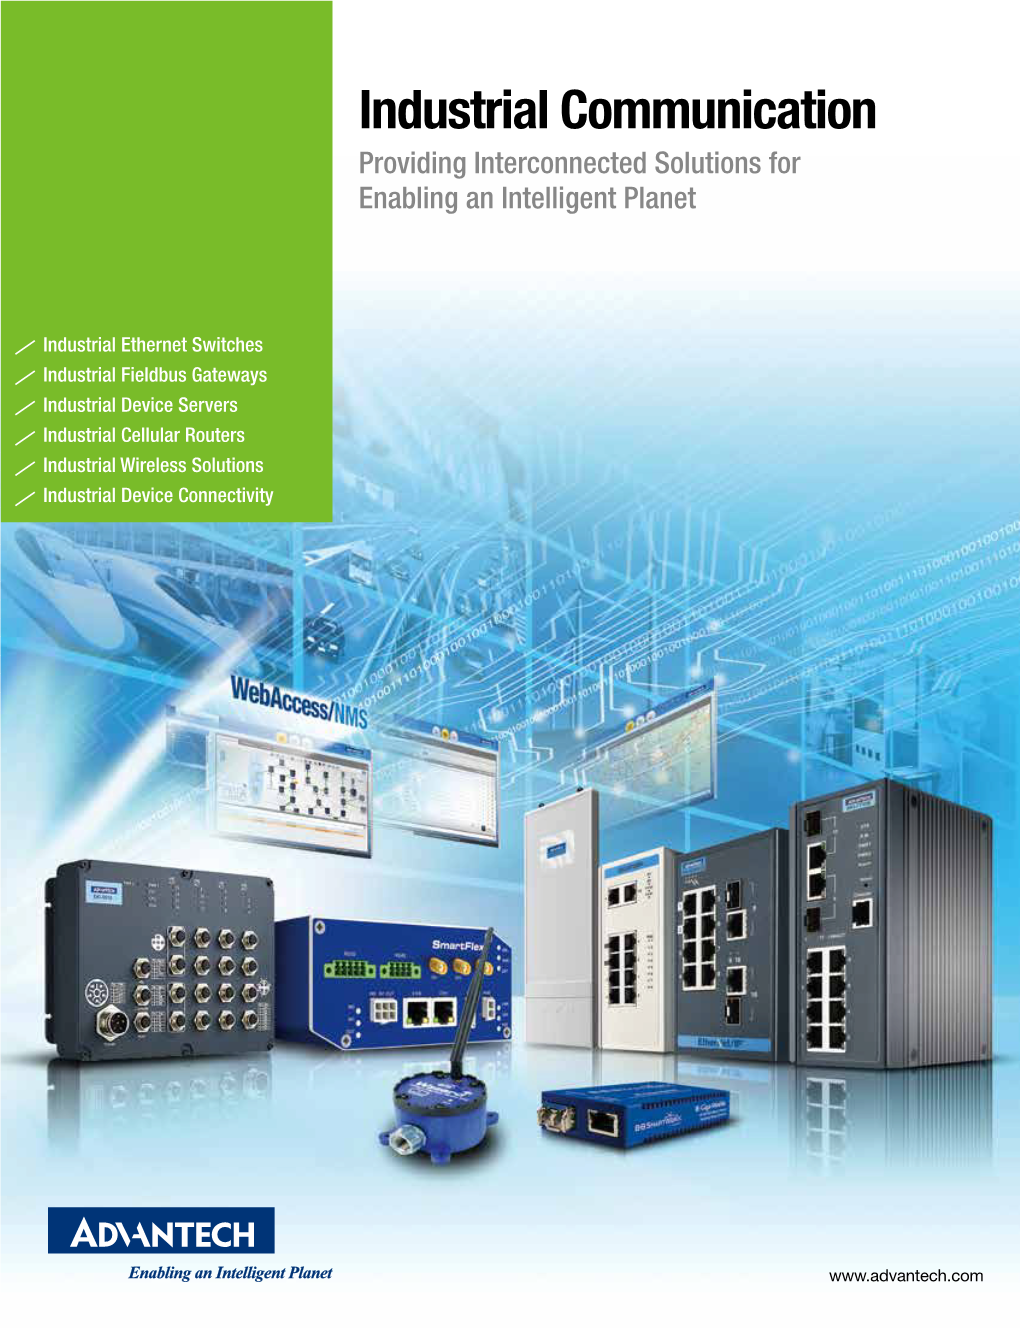 Industrial Communication Providing Interconnected Solutions for Enabling an Intelligent Planet